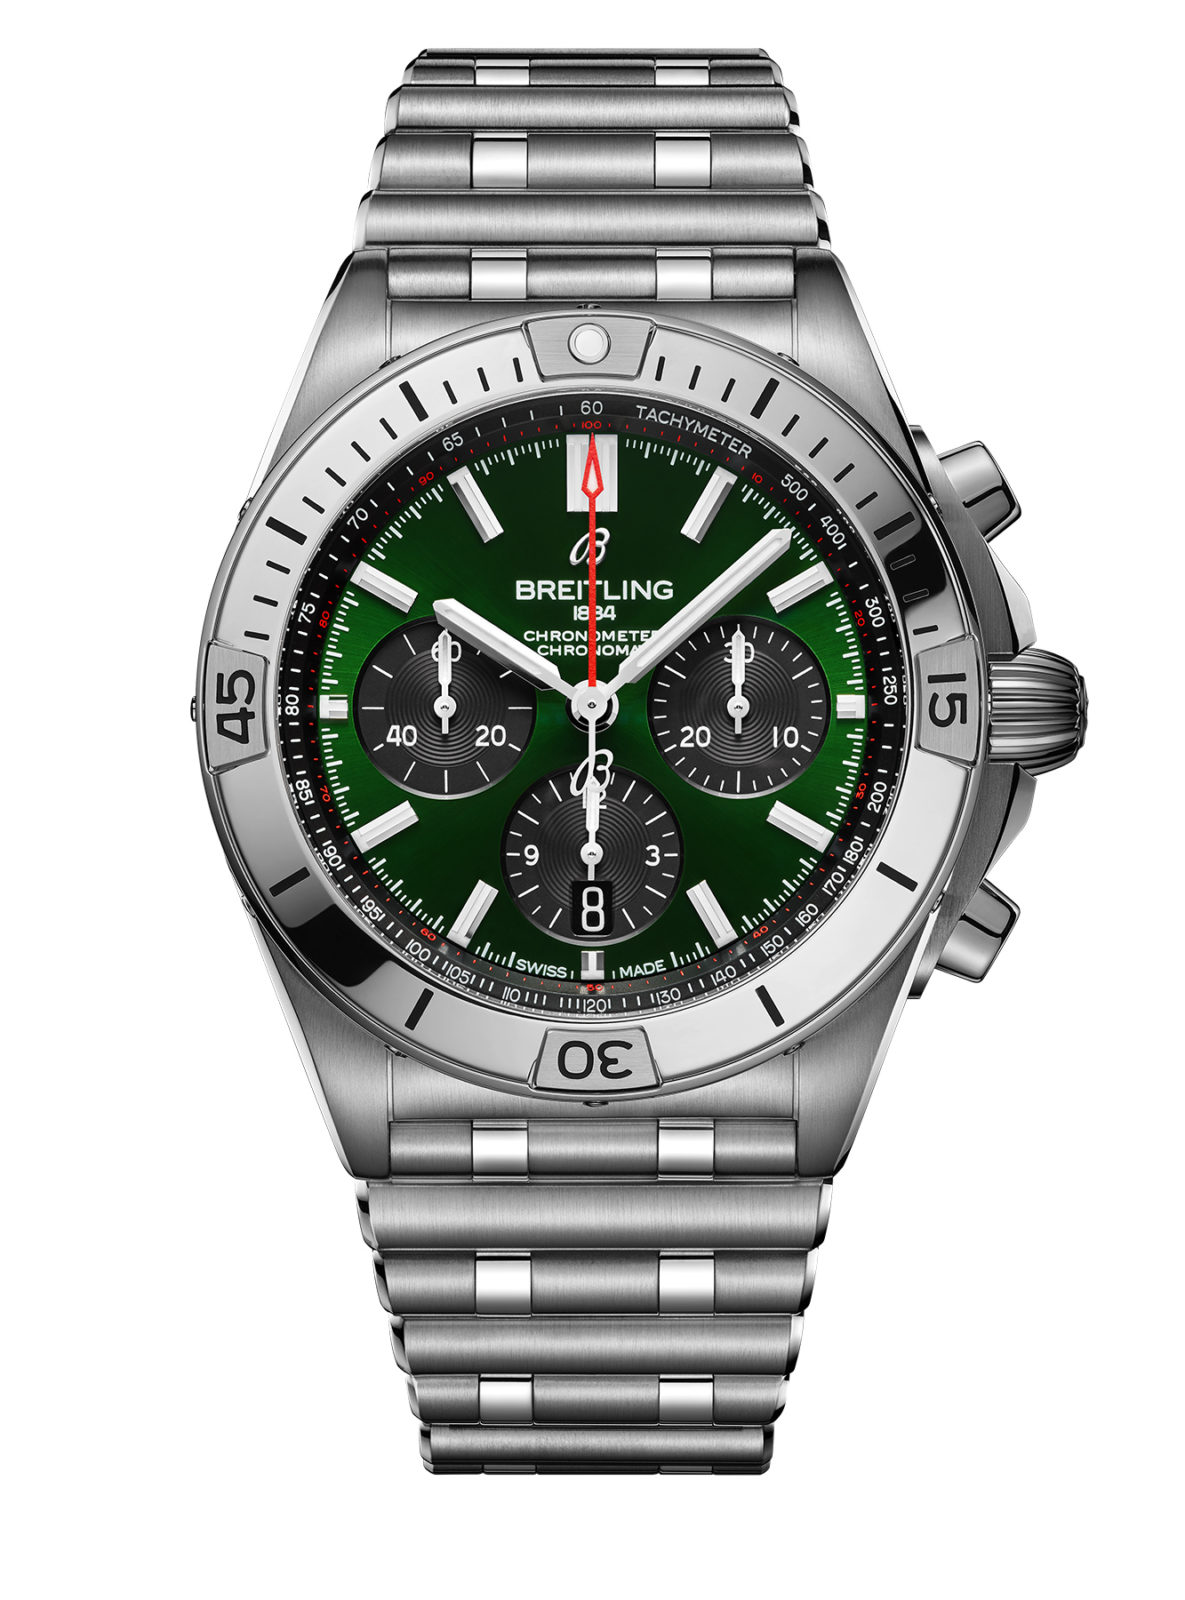 Nouvelle collection Breitling Chronomat - Breitling Chronomat B01 Bentley Limited Edition